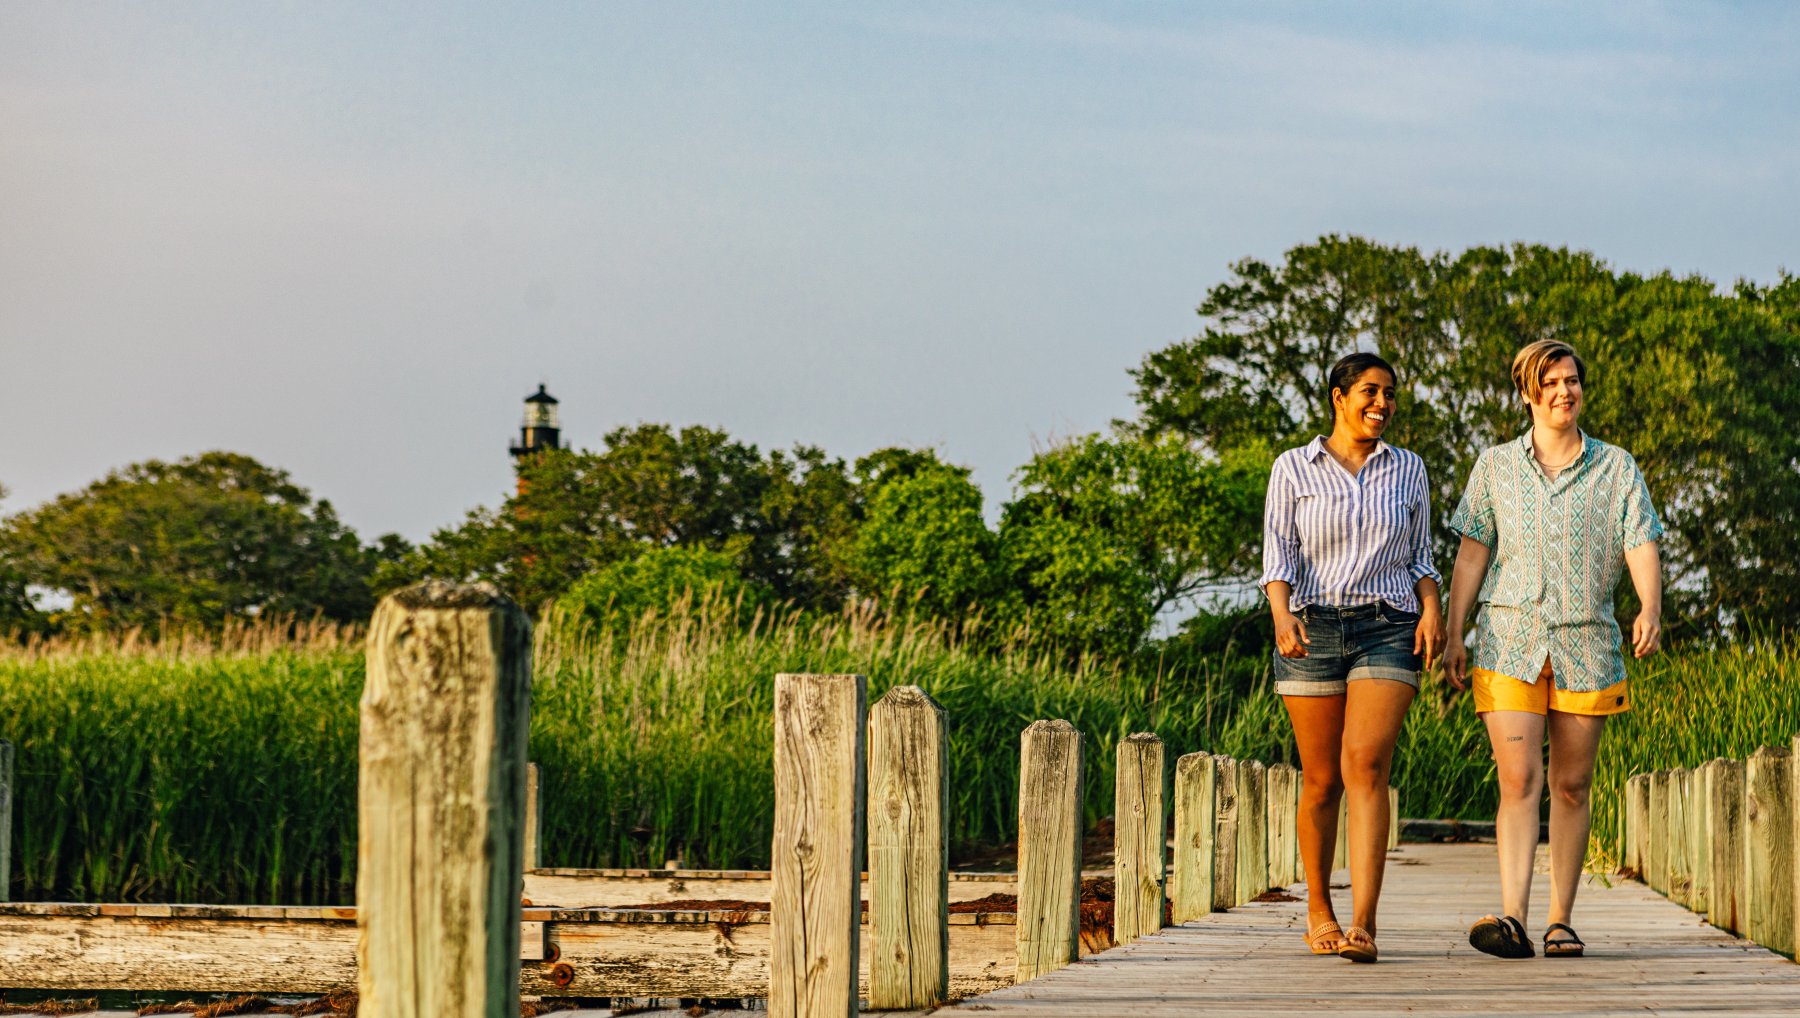 Couple wCouple walking down dock at Historic Corolla Park. alking on dock with green trees and lighthouse in background